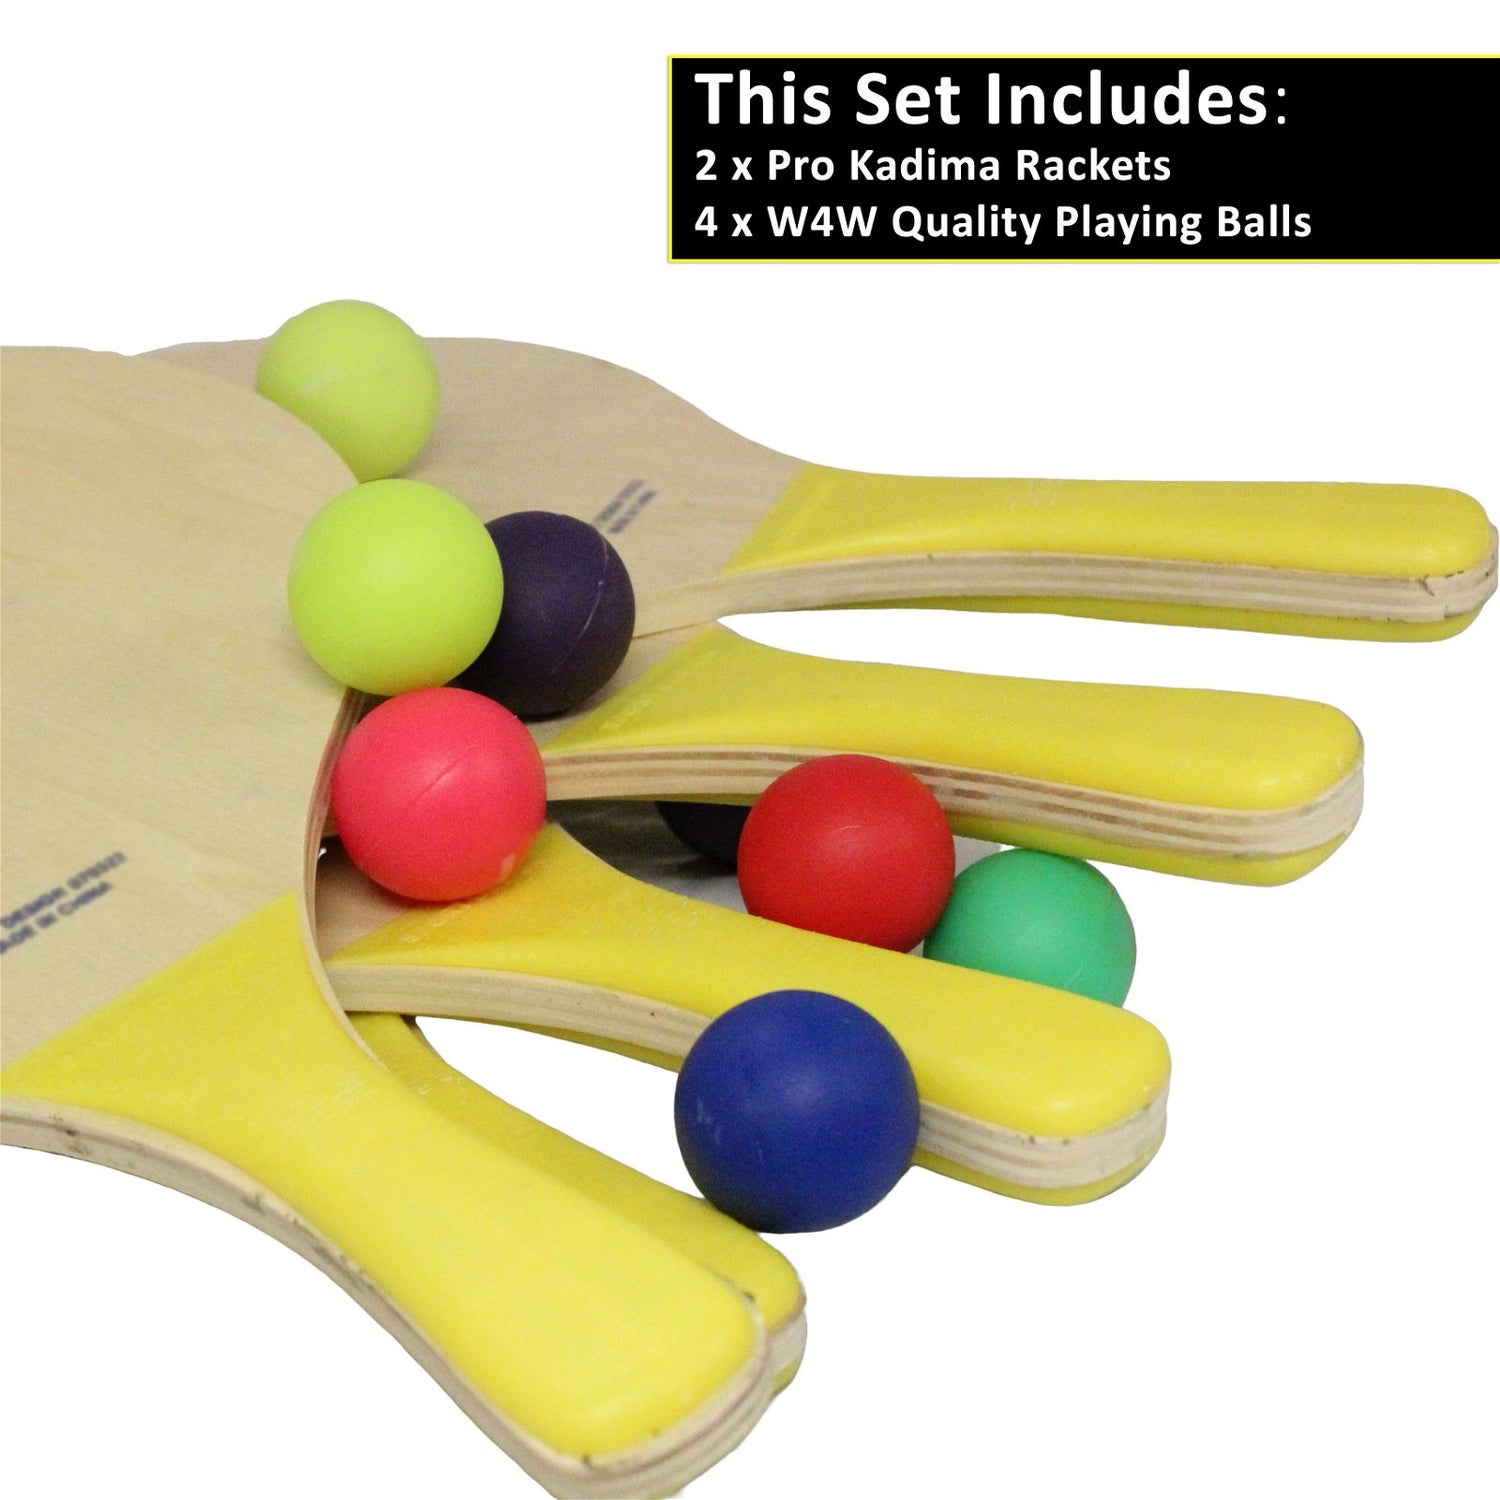 W4W Kadima Beach Paddle Ball Racket Set - Bundle Pack Includes 4 Balls & 2 Paddles - Natural - Ages 15+ - W4W Products 